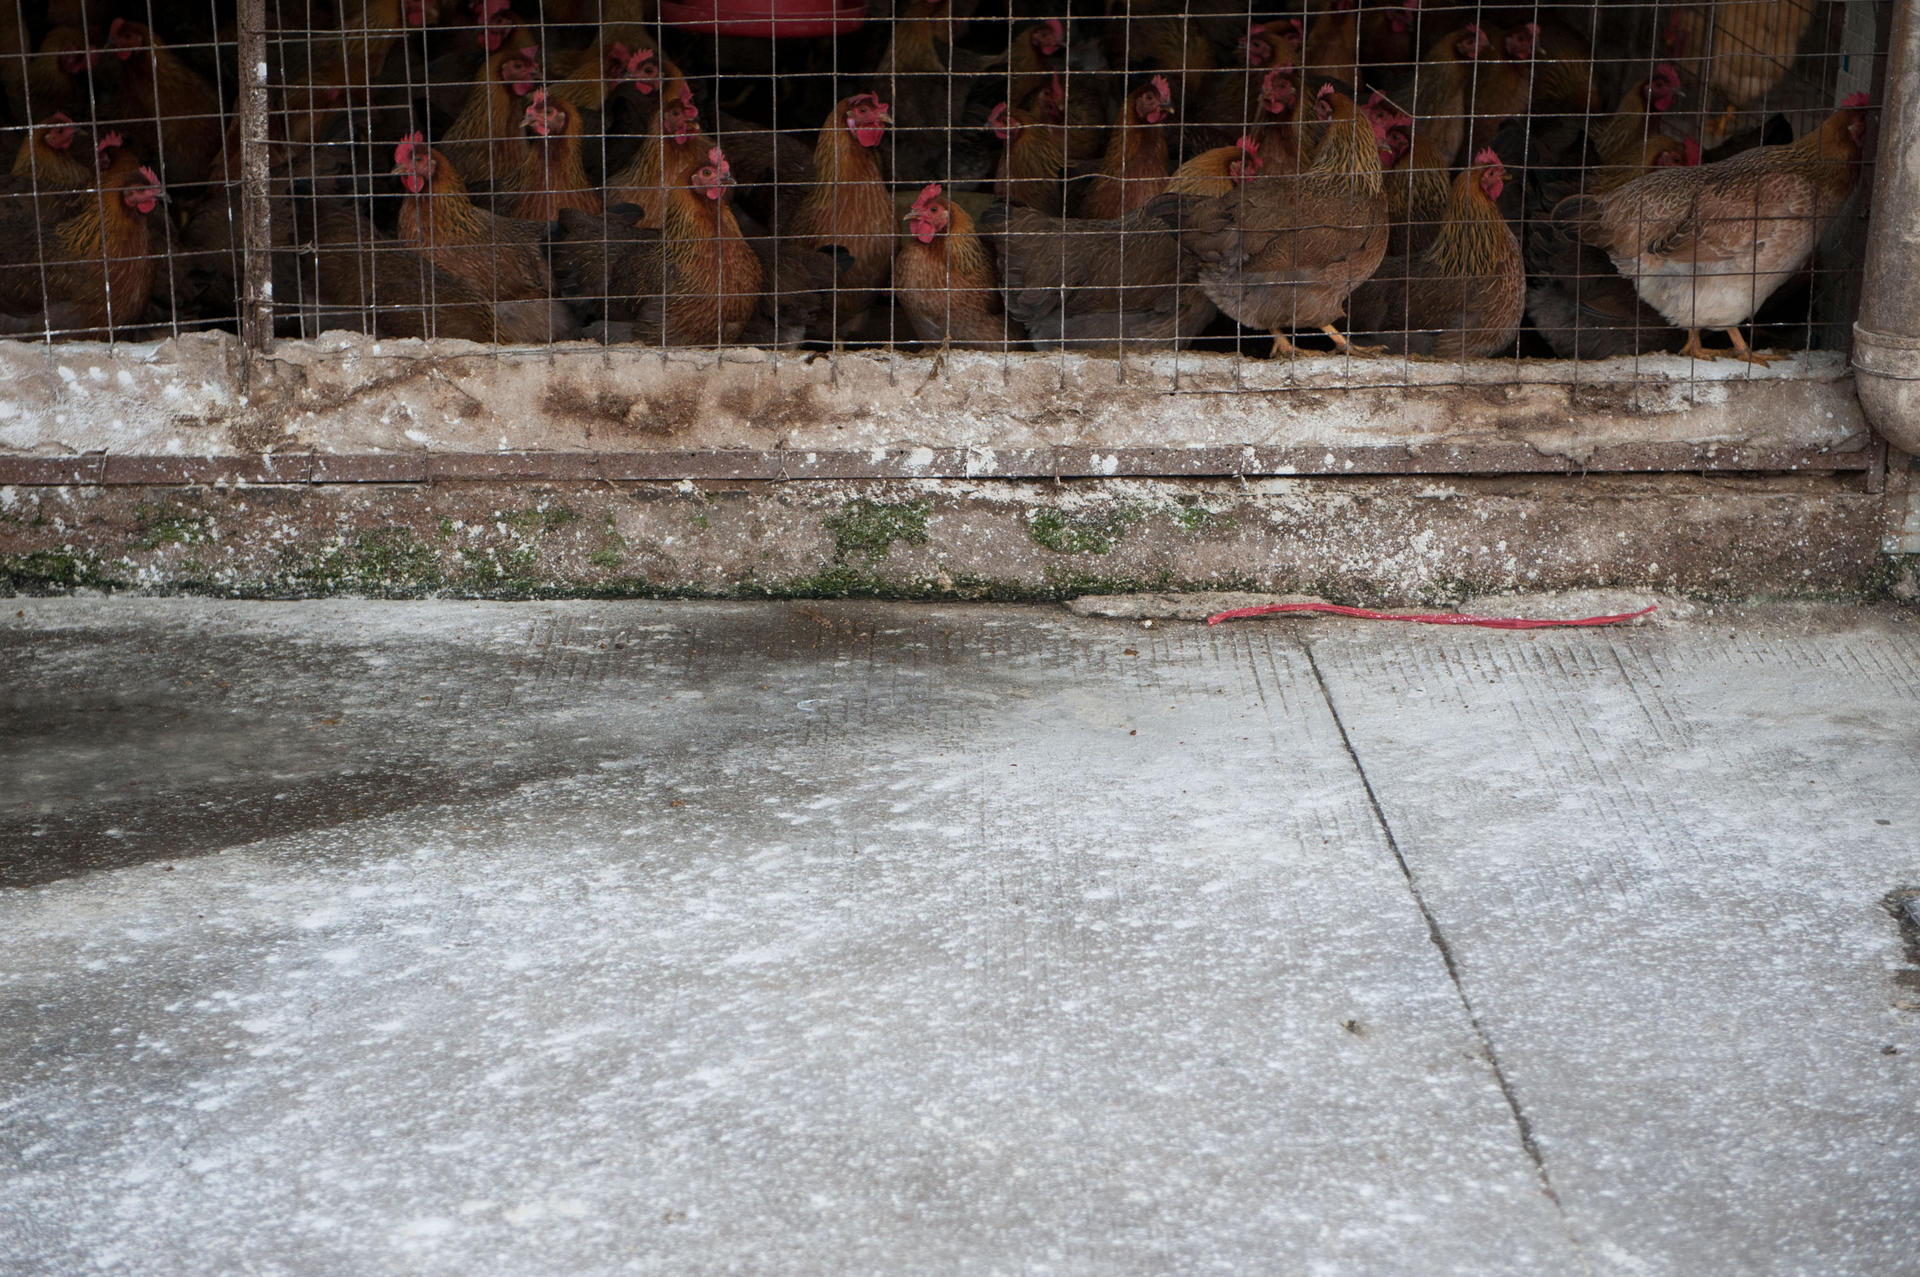 Disinfectant powder is seen around chicken cages at a live poultry market in Longgang district, Shenzhen. Photo: Xinhua